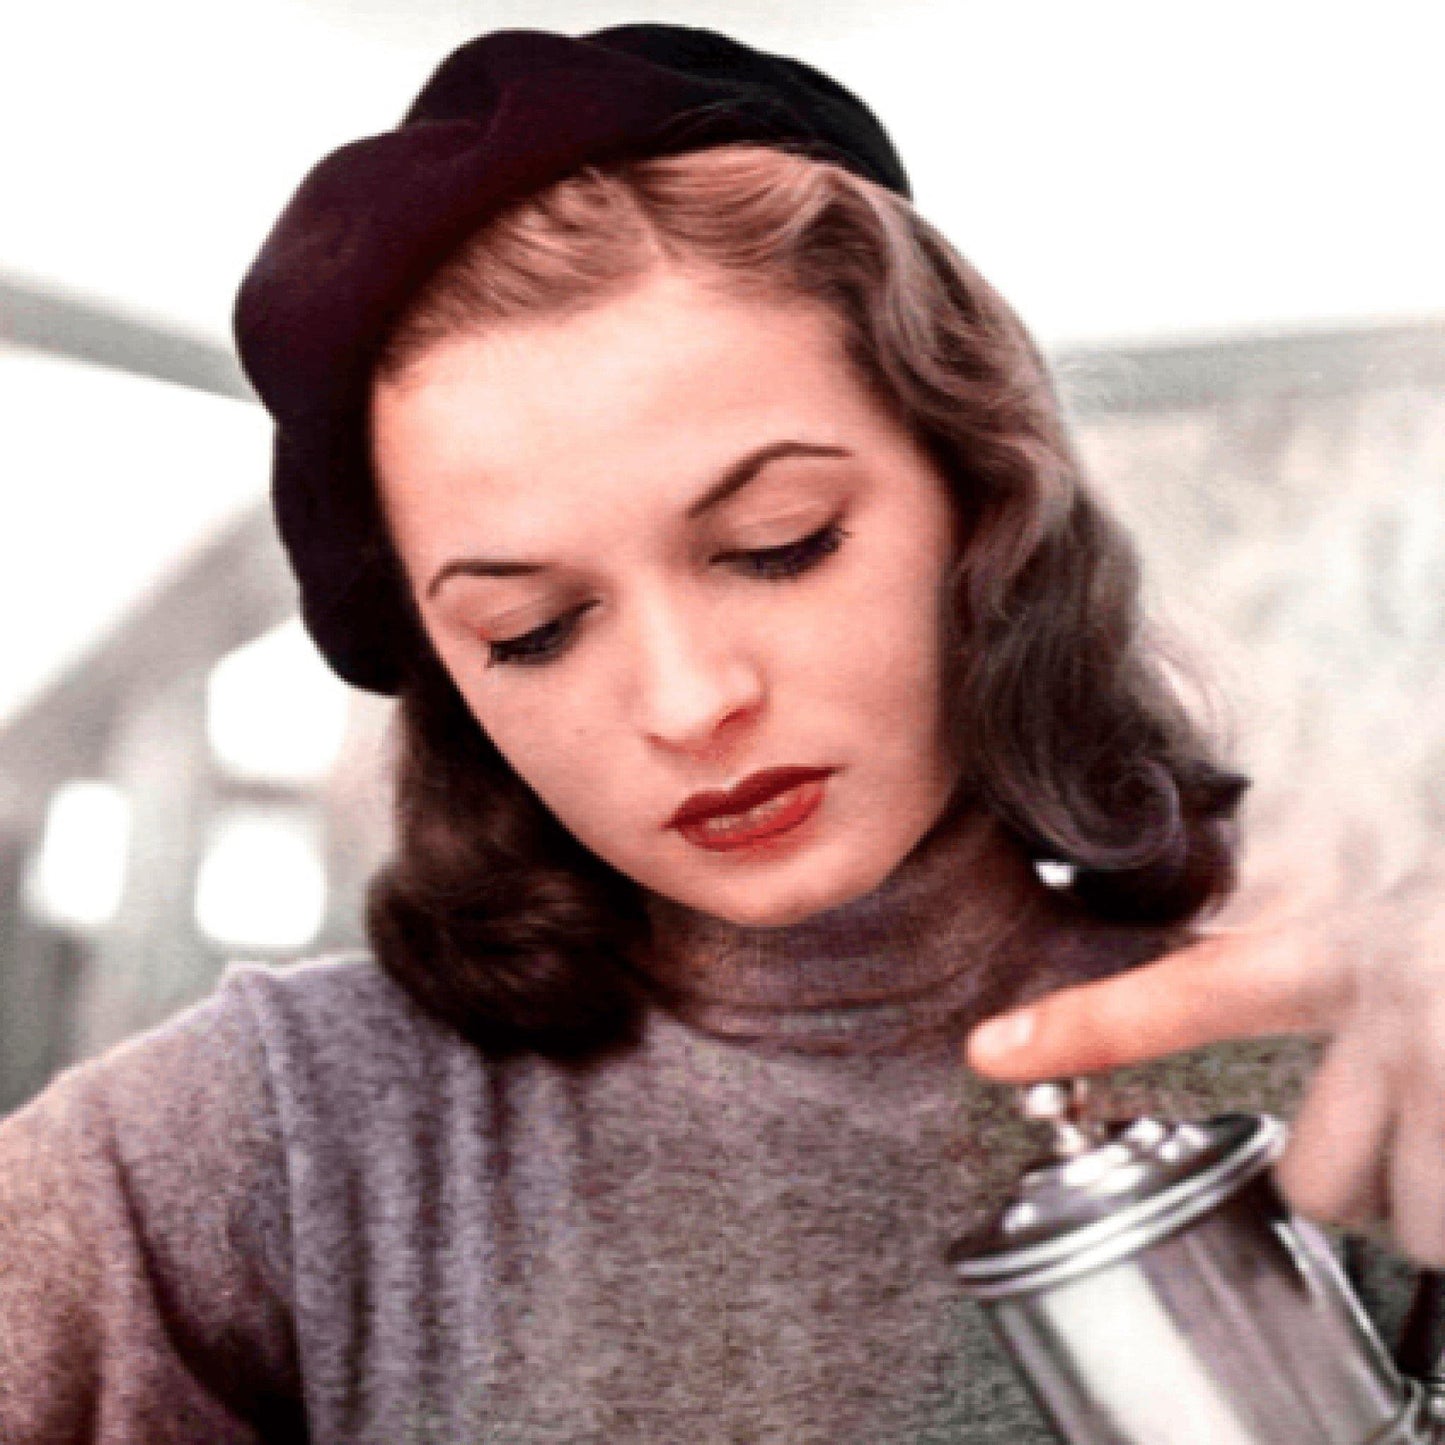 Photograph of a women wearing vintage beret.